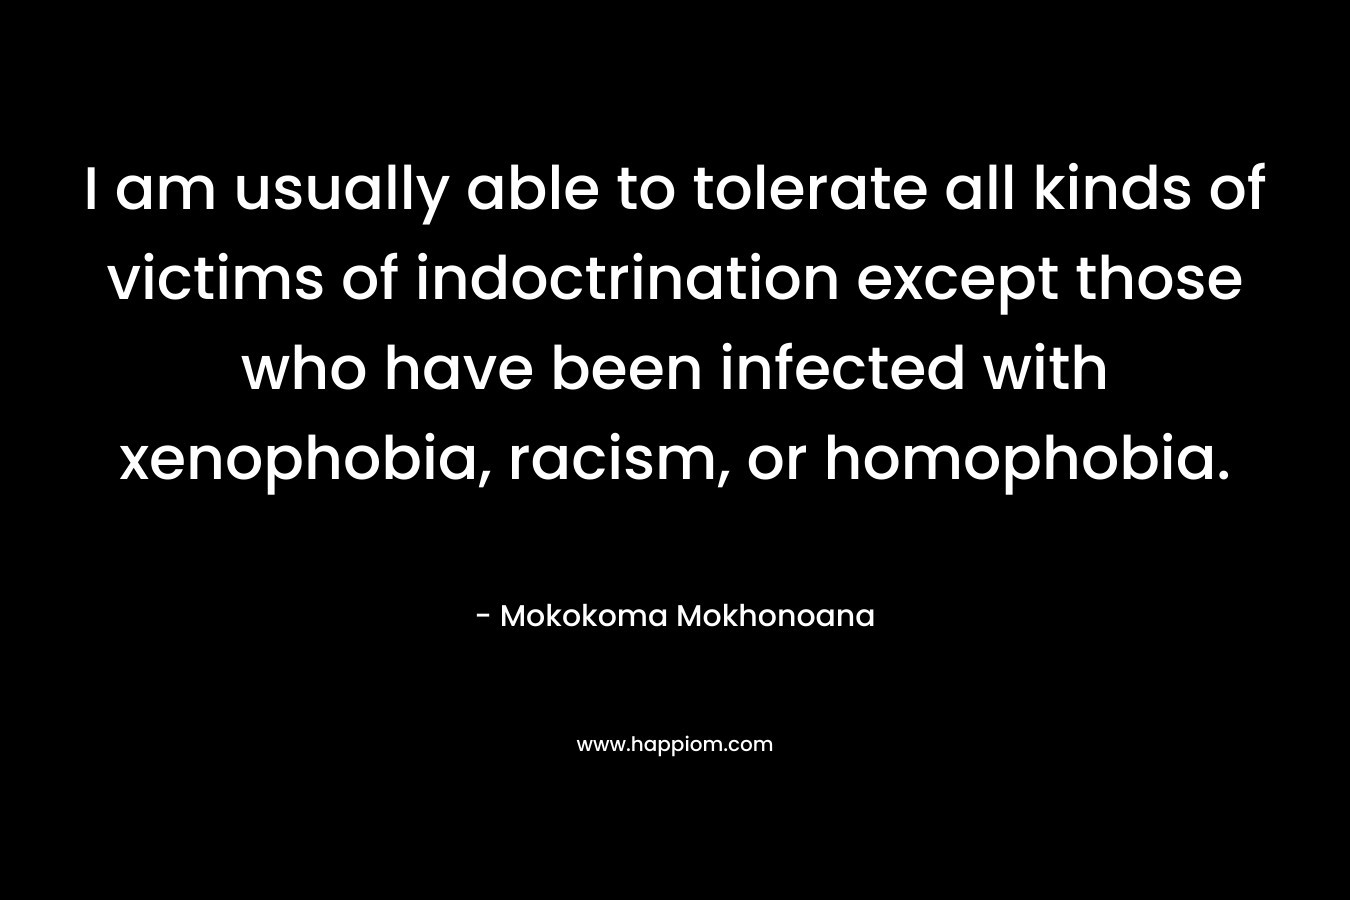 I am usually able to tolerate all kinds of victims of indoctrination except those who have been infected with xenophobia, racism, or homophobia.